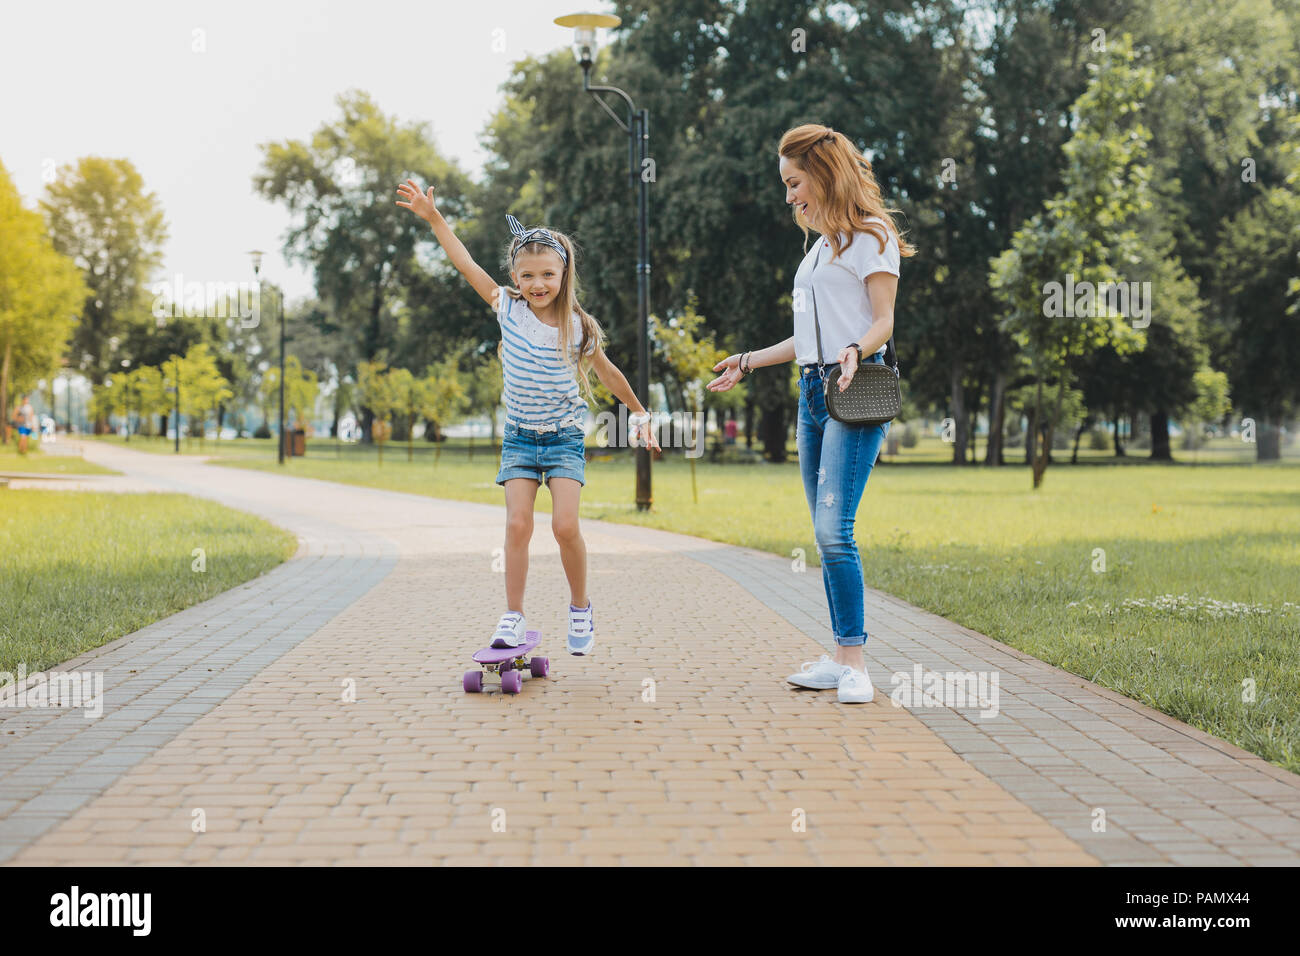 Good-looking active mother and daughter on open air Stock Photo